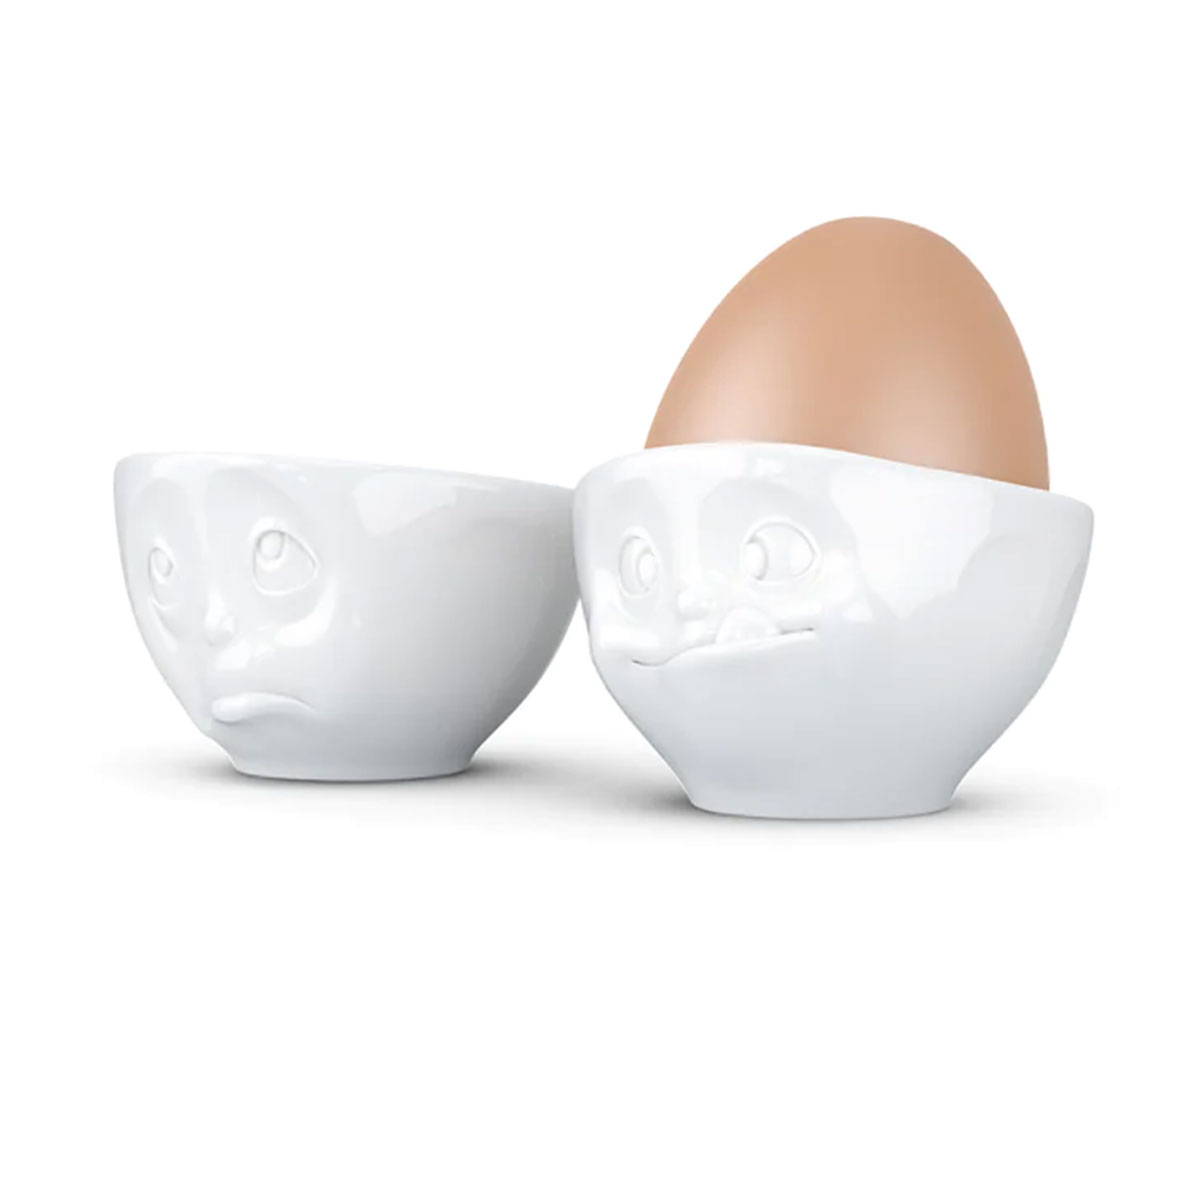 Set of 2 White Porcelain Egg Cups by Tassen - Greedy and Sulky